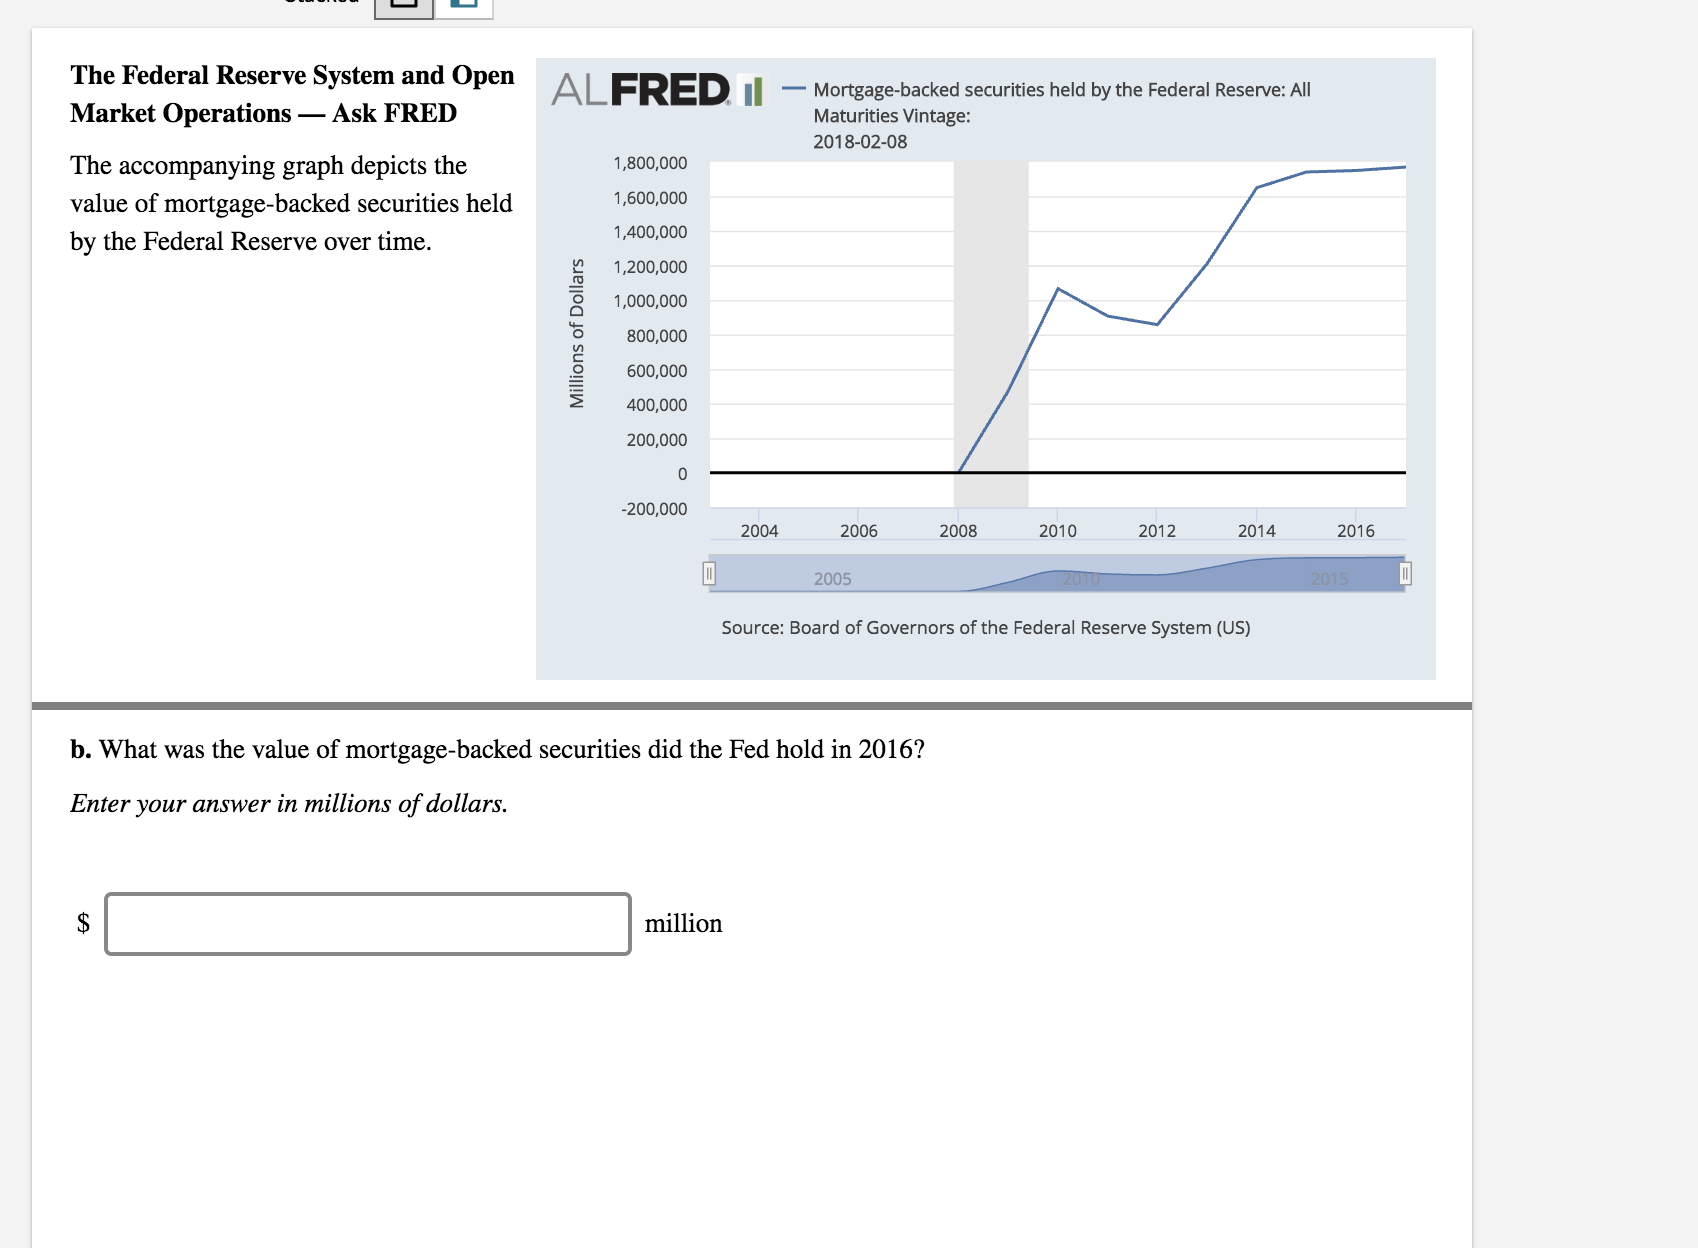 The Federal Reserve System and Open
Market Operations_ Ask FRED
The accompanying graph depicts the
value of mortgage-backed securities held
by the Federal Reserve over time.
ALFRED IlMorgage-backed securities held by the Federal Reserve: All
Maturities Vintage
2018-02-08
1,800,000
1,600,000
1,400,000
1,200,000
O 1.000,000
800,000
600,000
400,000
200,000
-200,000
2004
2006
2008
2010
2012
2014
2016
2005
Source: Board of Governors of the Federal Reserve System (US)
b. What was the value of mortgage-backed securities did the Fed hold in 2016?
Enter your answer in millions of dollars
million
